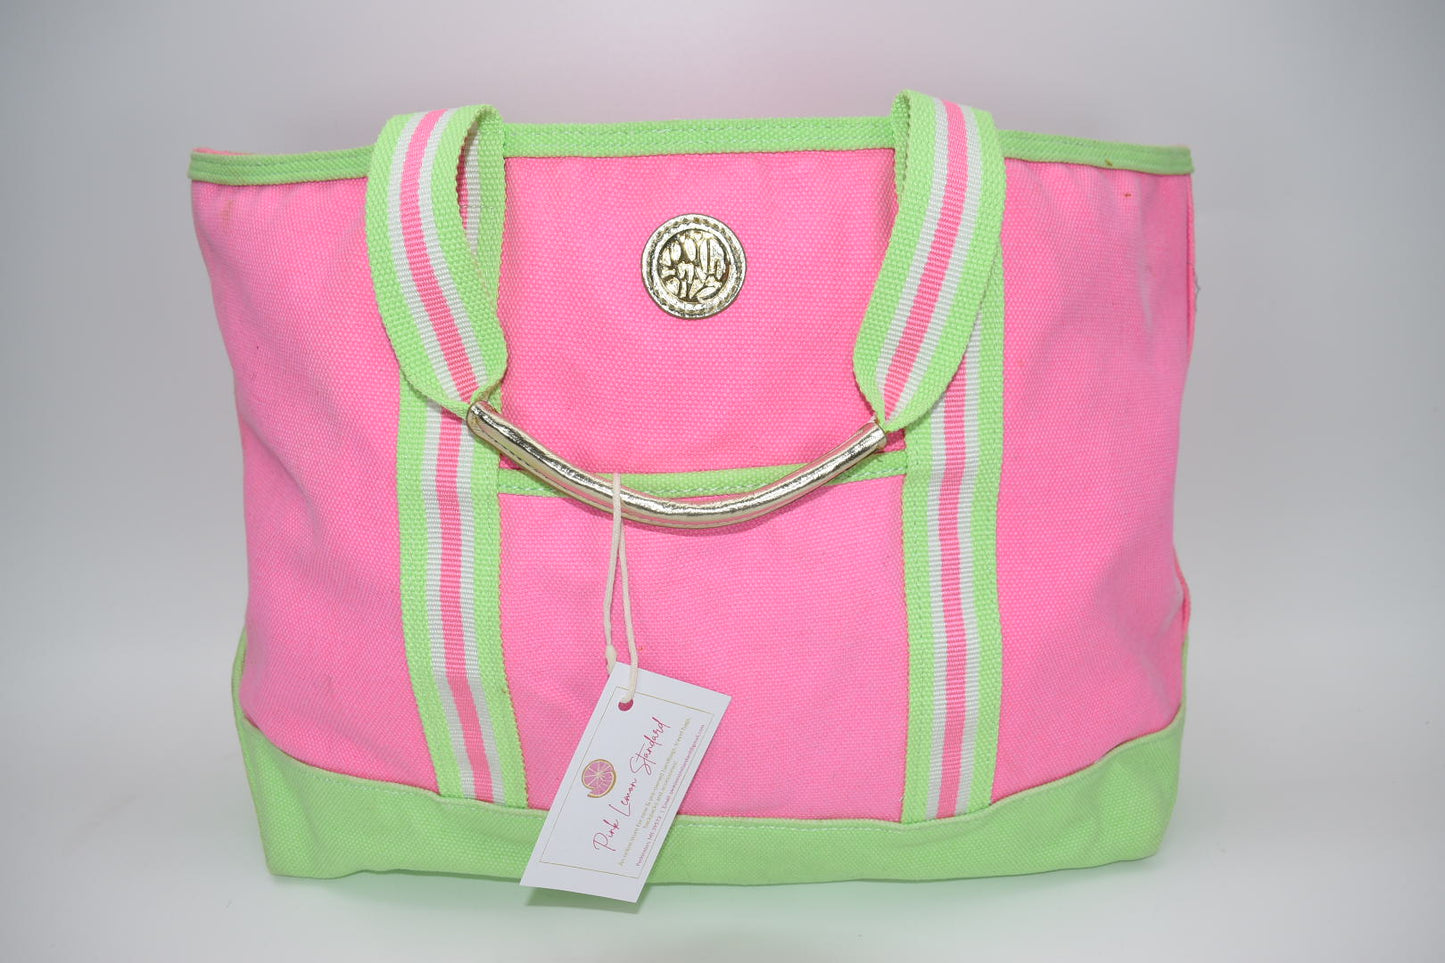 Lilly Pulitzer Mercato Tote Bag in Shandy Pink